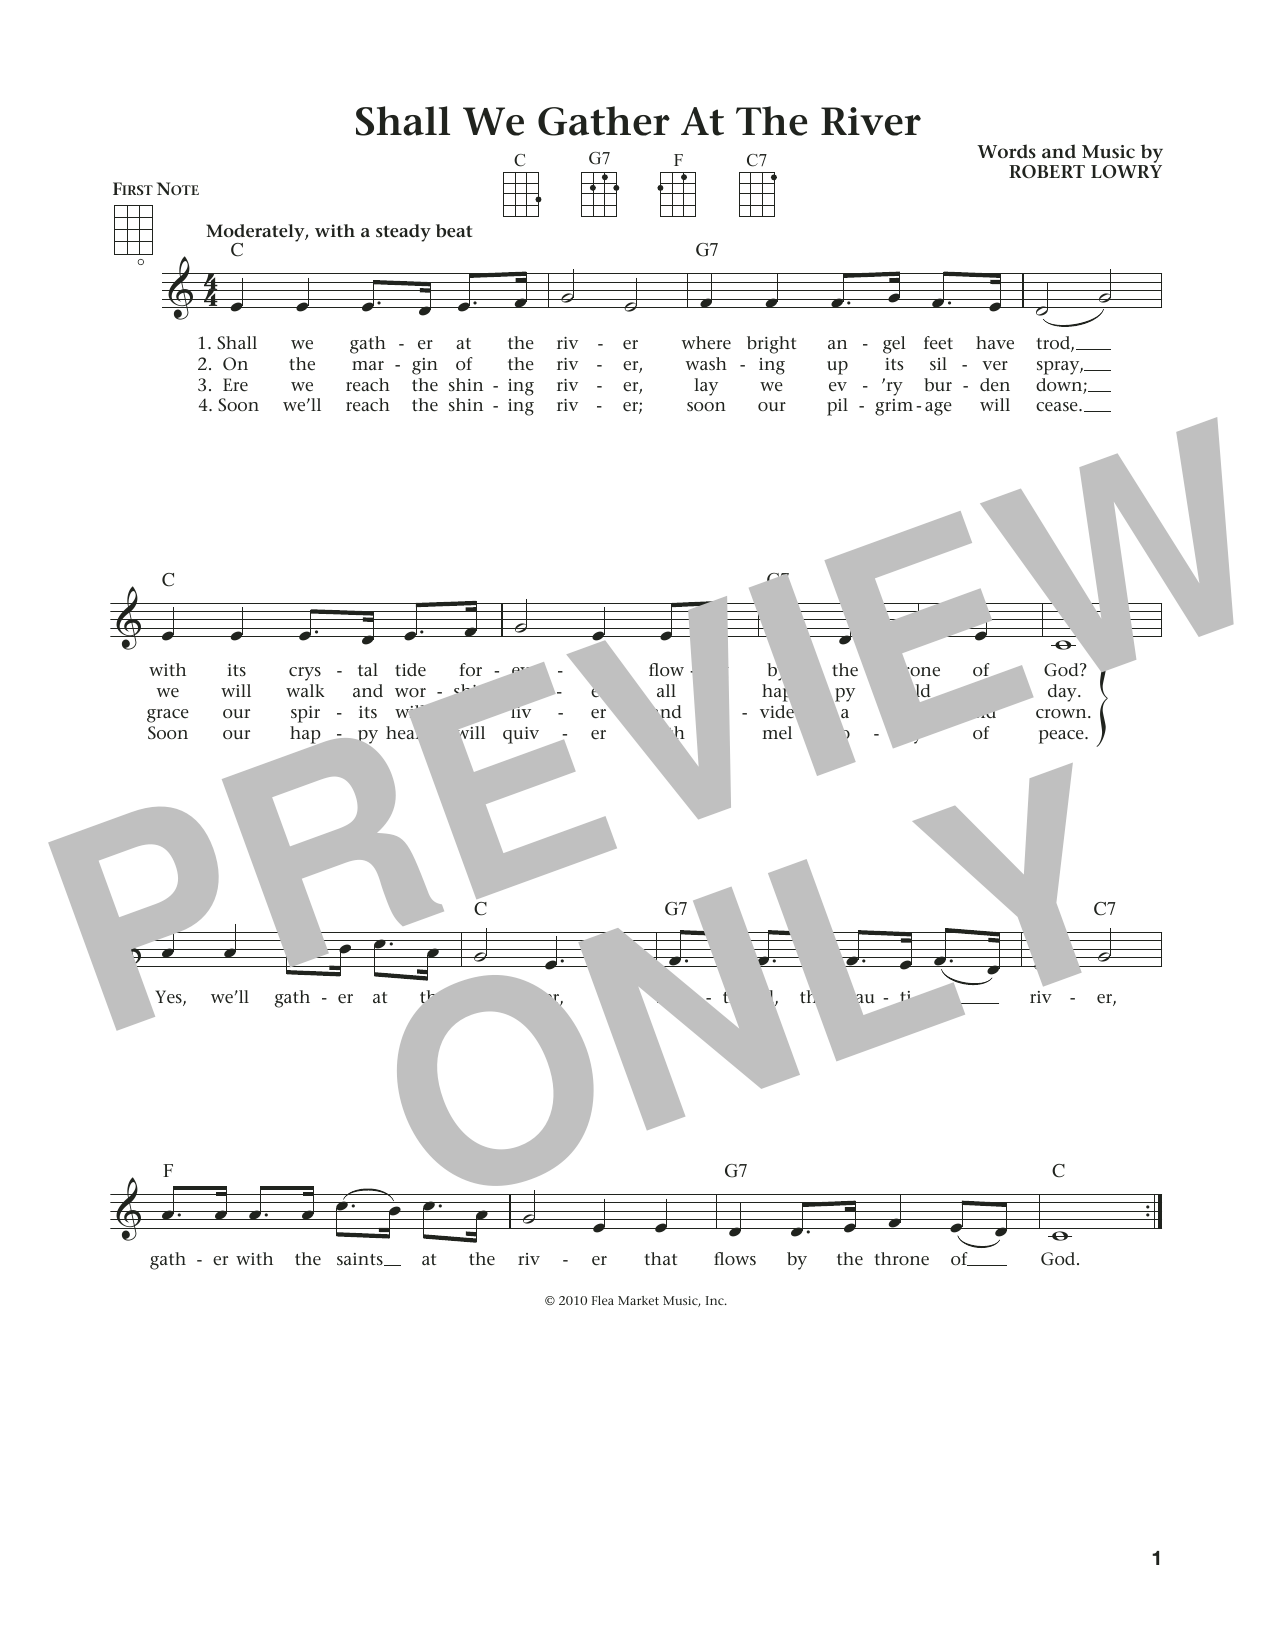 Download Robert Lowry Shall We Gather At The River? (from The Sheet Music